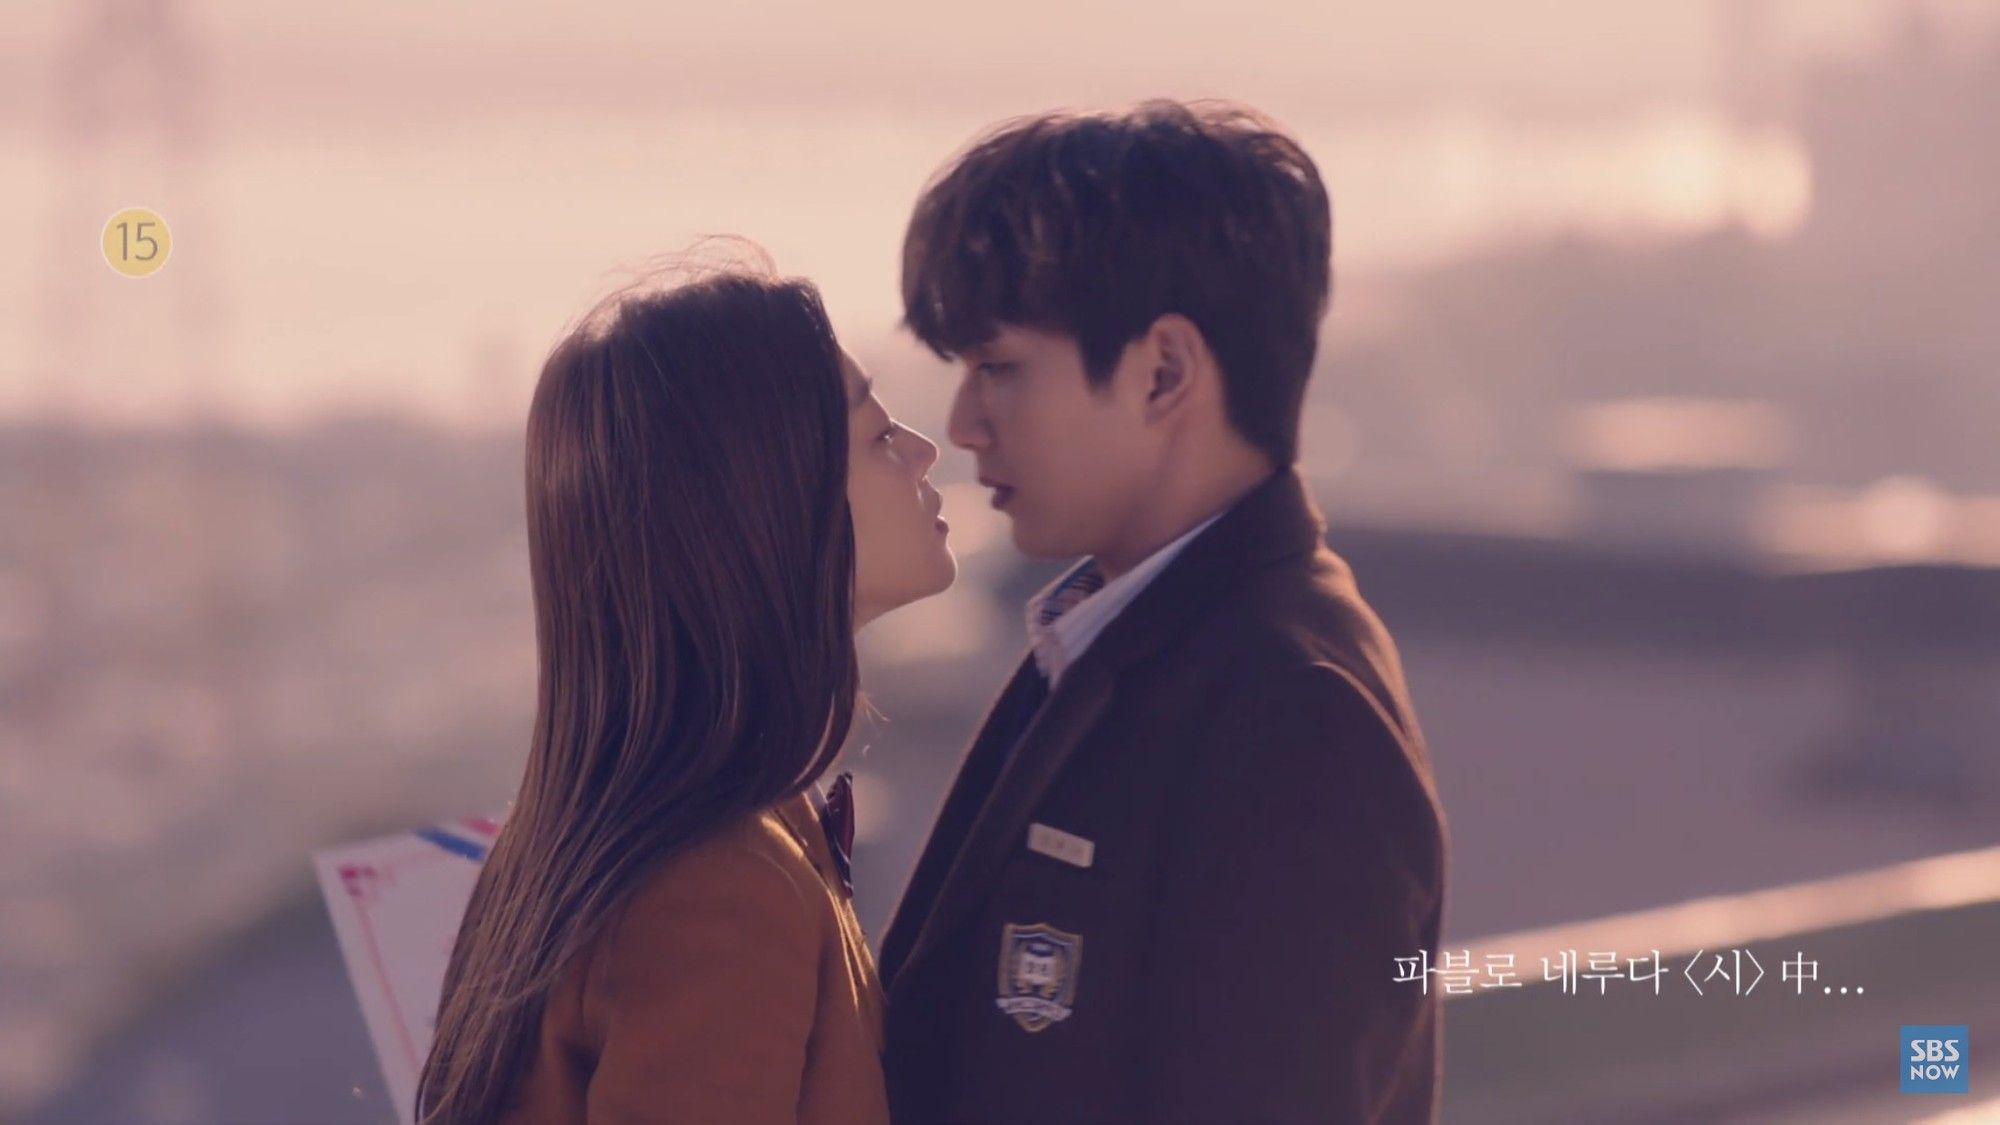 ASK K POP Yoo Seung Ho And Jo Bo Ah Share Tense Moment On “My